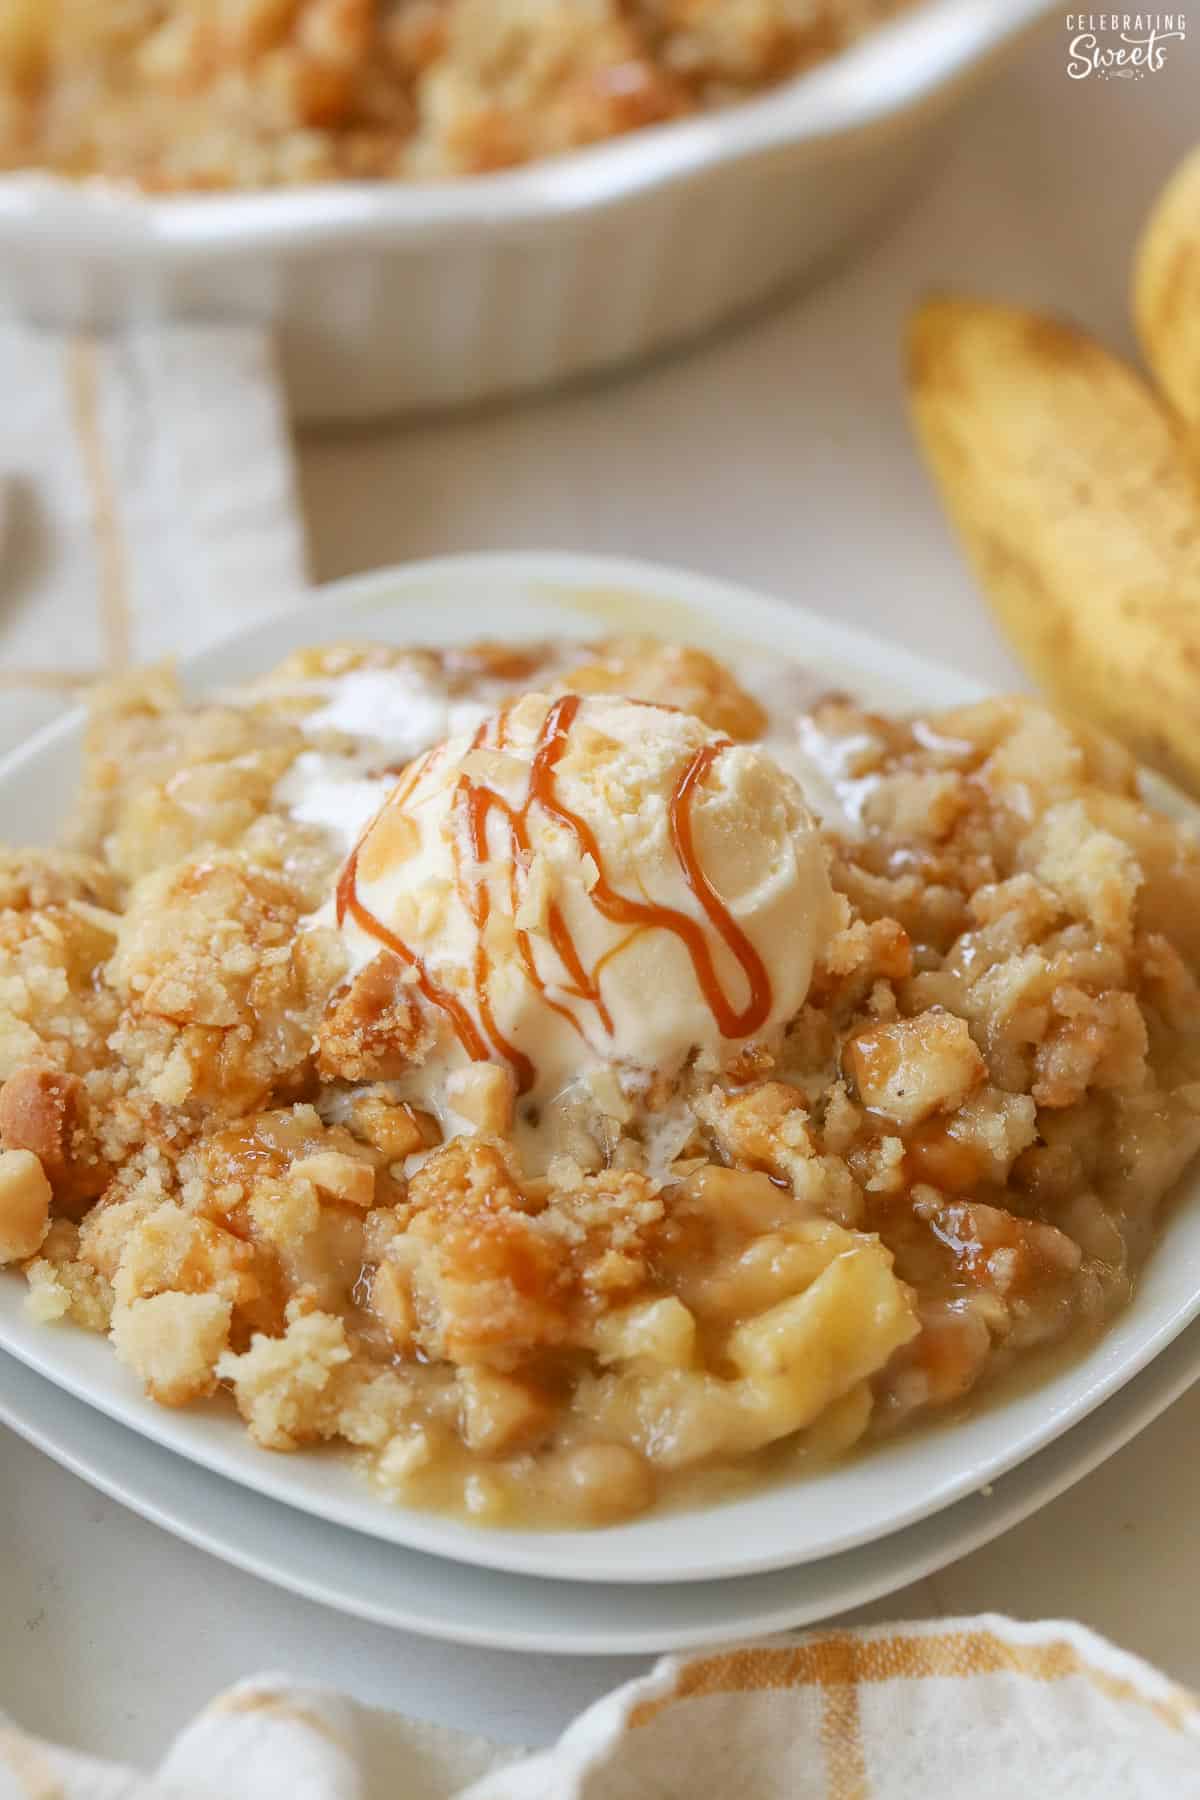 Banana crumble topped with caramel drizzle and vanilla ice cream on a white plate.